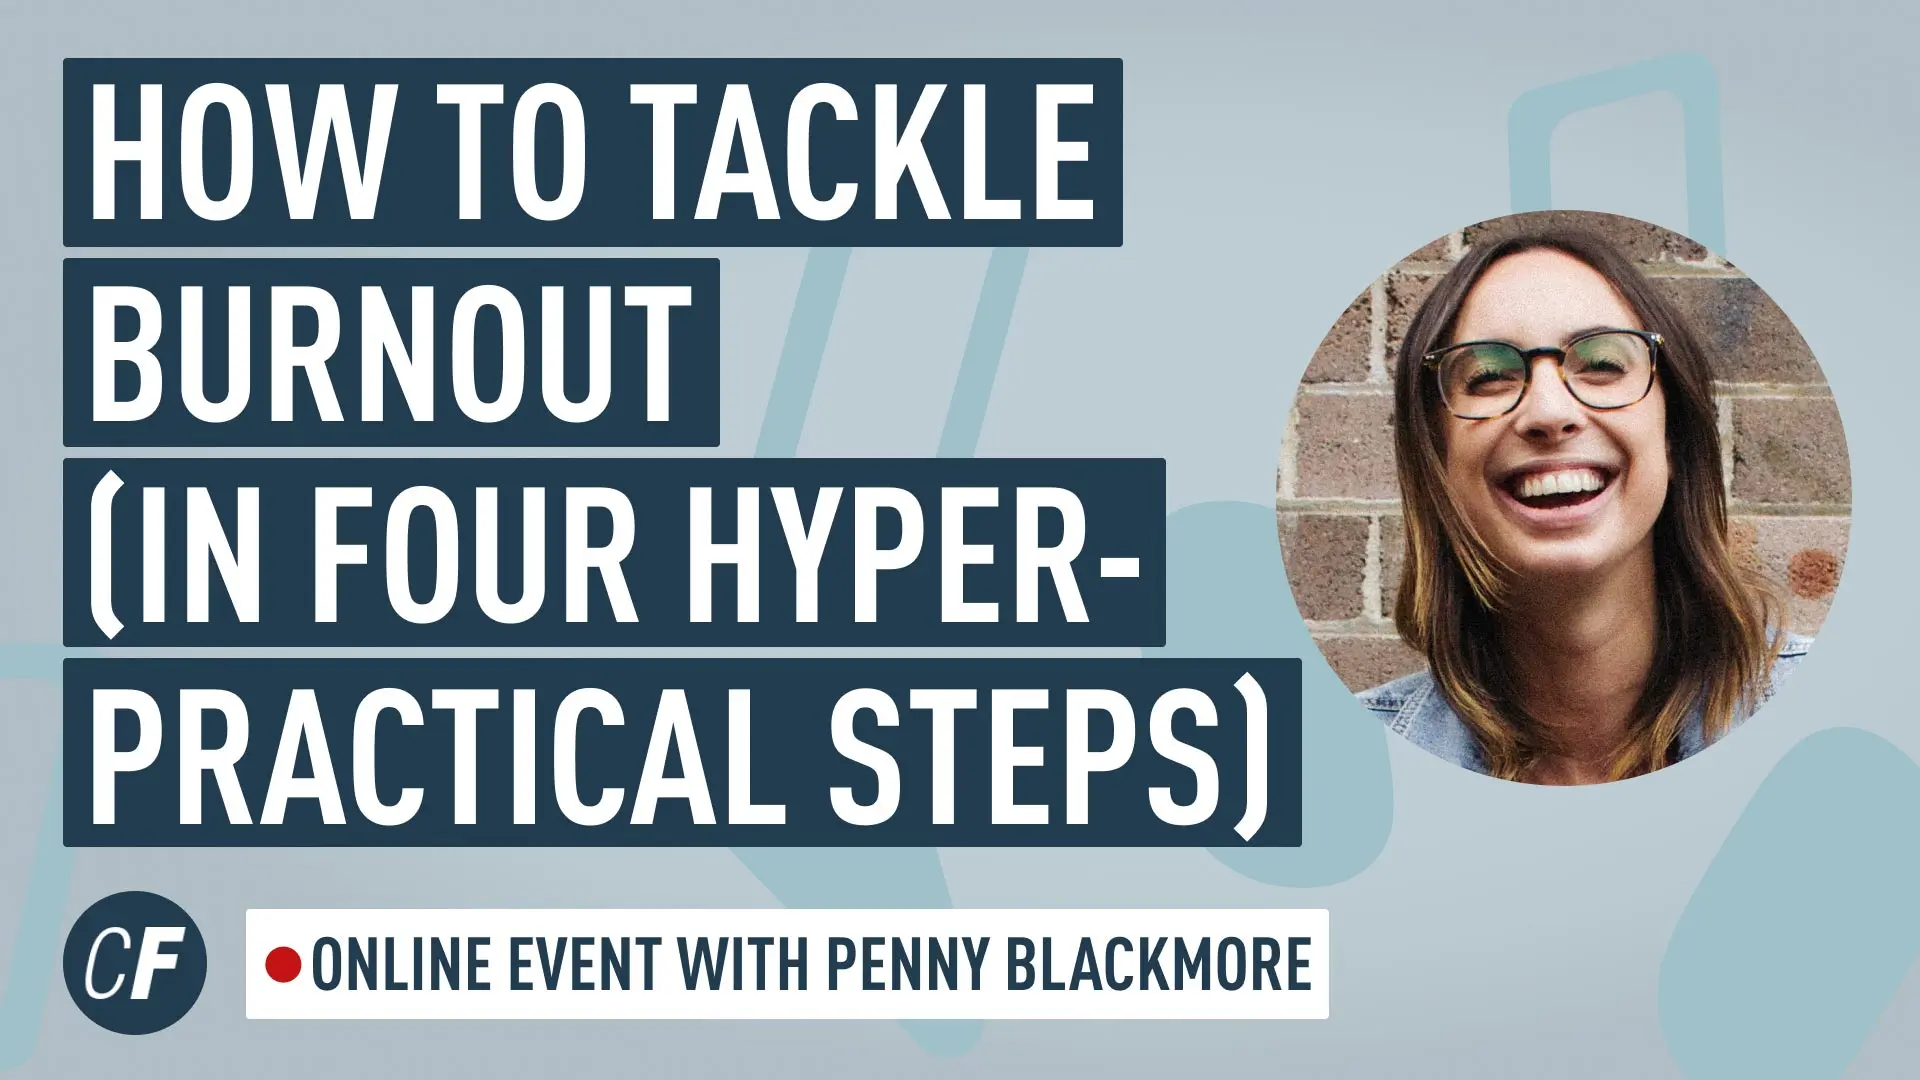 How to Tackle Burnout (in 4 Hyper-Practical Steps!) Online Event